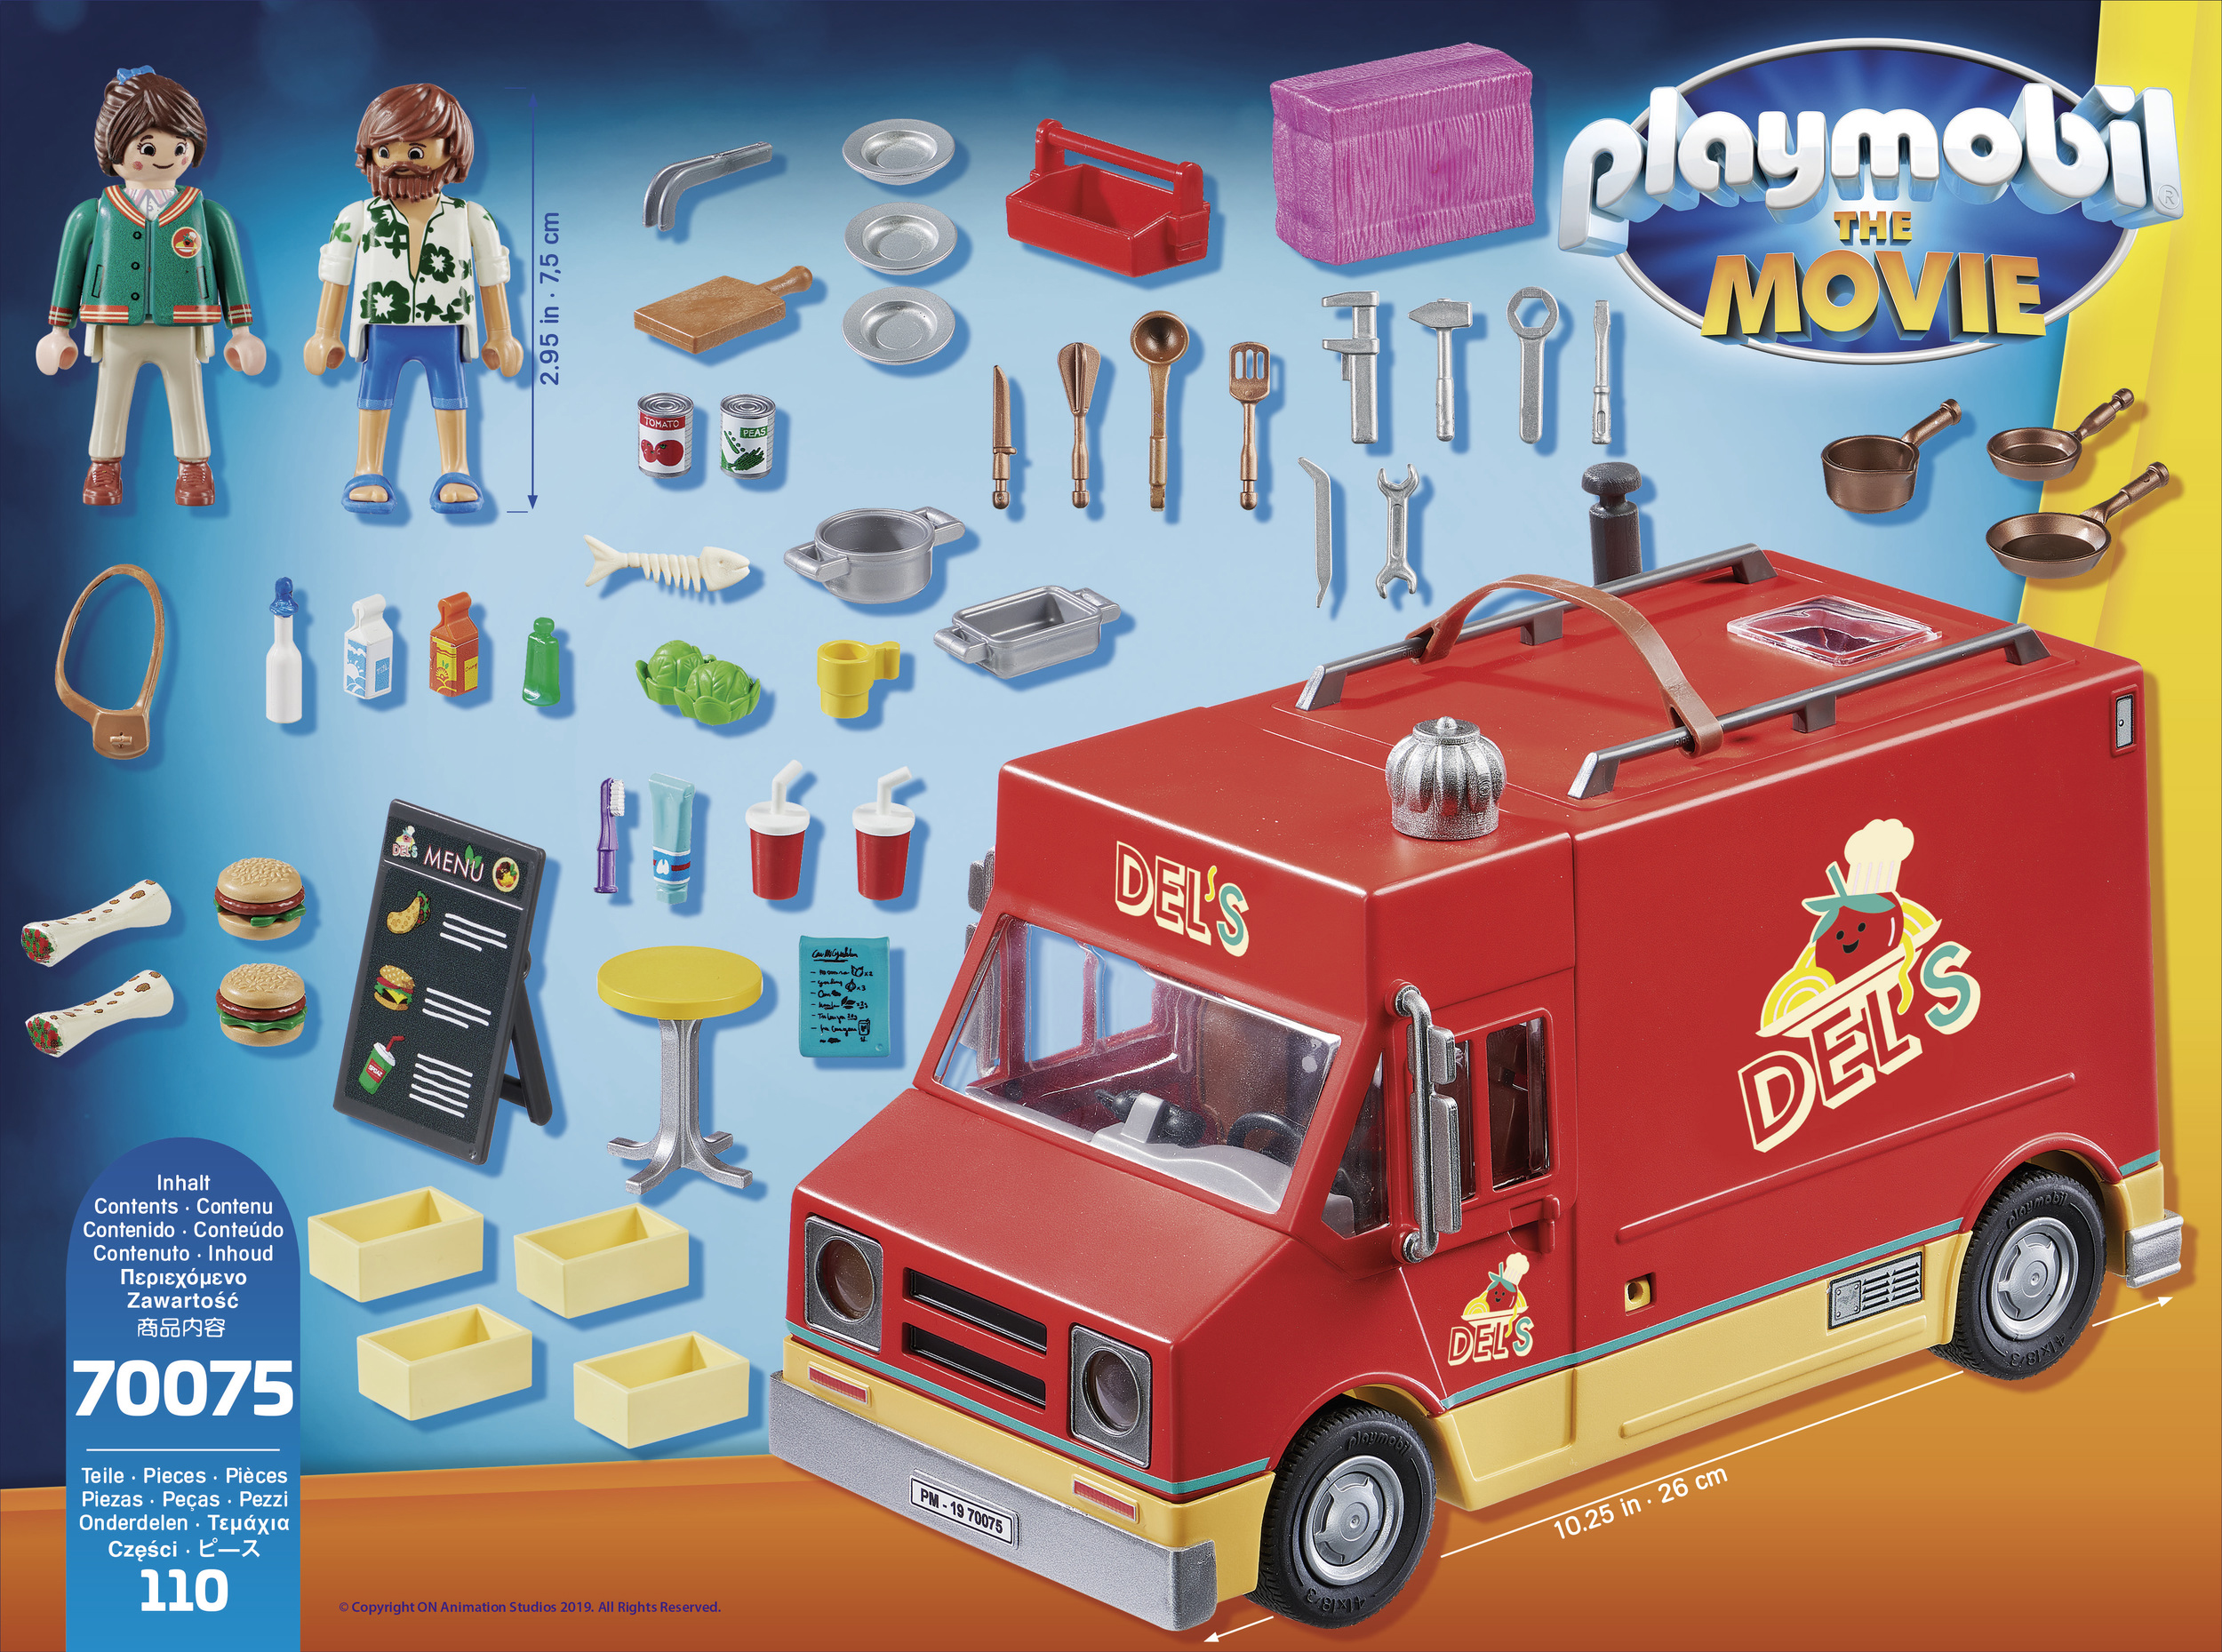 PLAYMOBIL THE MOVIE Del's Food Truck - image 5 of 6